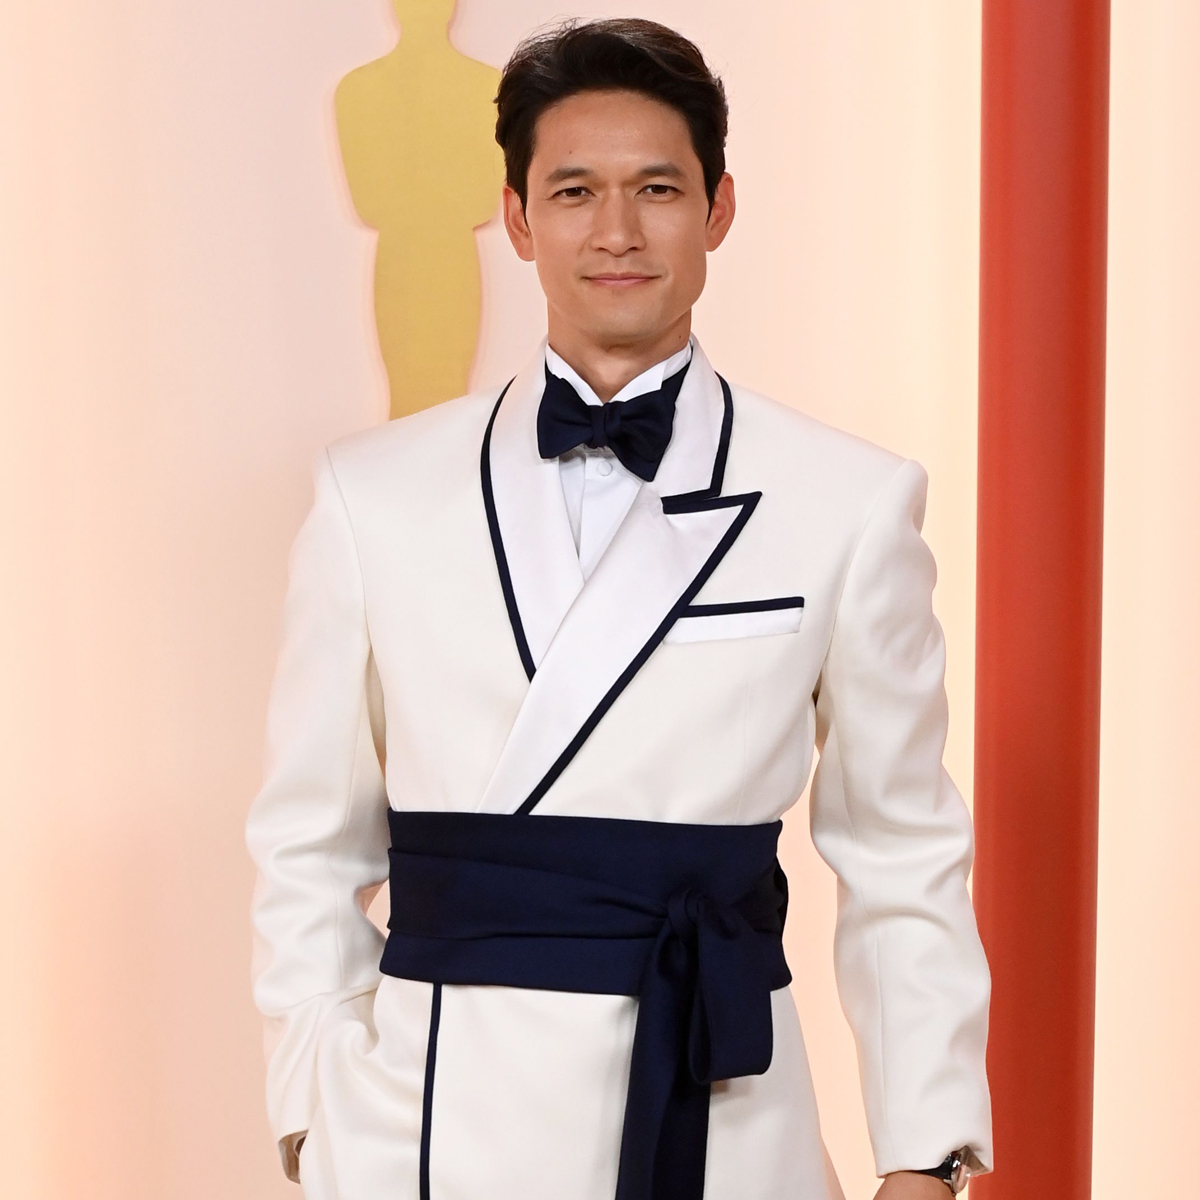 Harry Shum Jr. Shares Why There Isn’t a Crazy Rich Asians 2 Yet